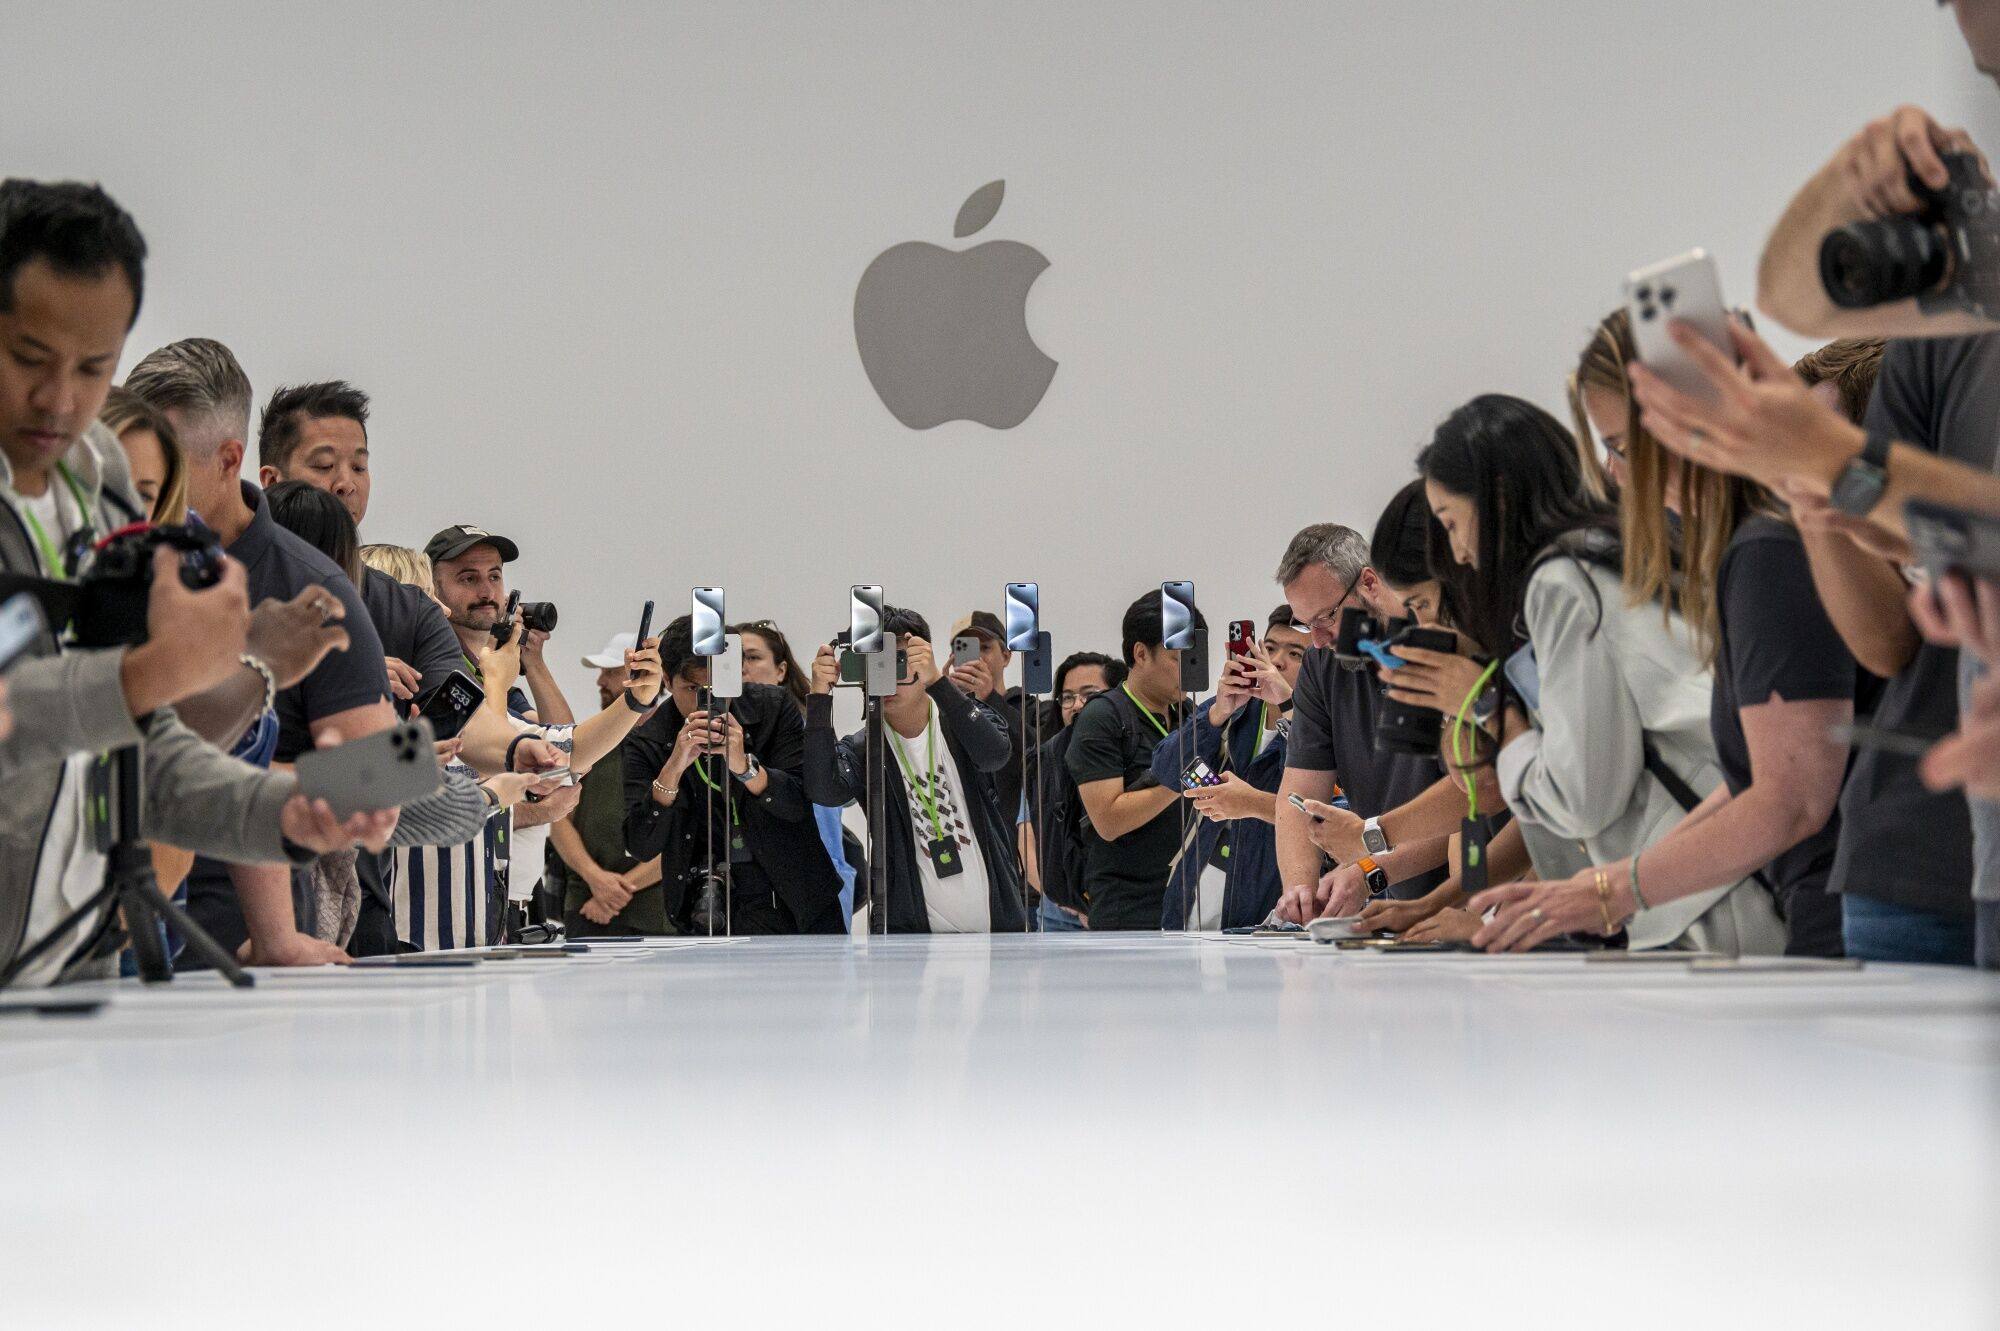 Attendees check out the iPhone 15 Pro and iPhone 15 Pro Max handsets on display during Apple’s launch of its new flagship smartphone models at the Apple Park campus in Cupertino, California, on September 12, 2023. Photo: Bloomberg